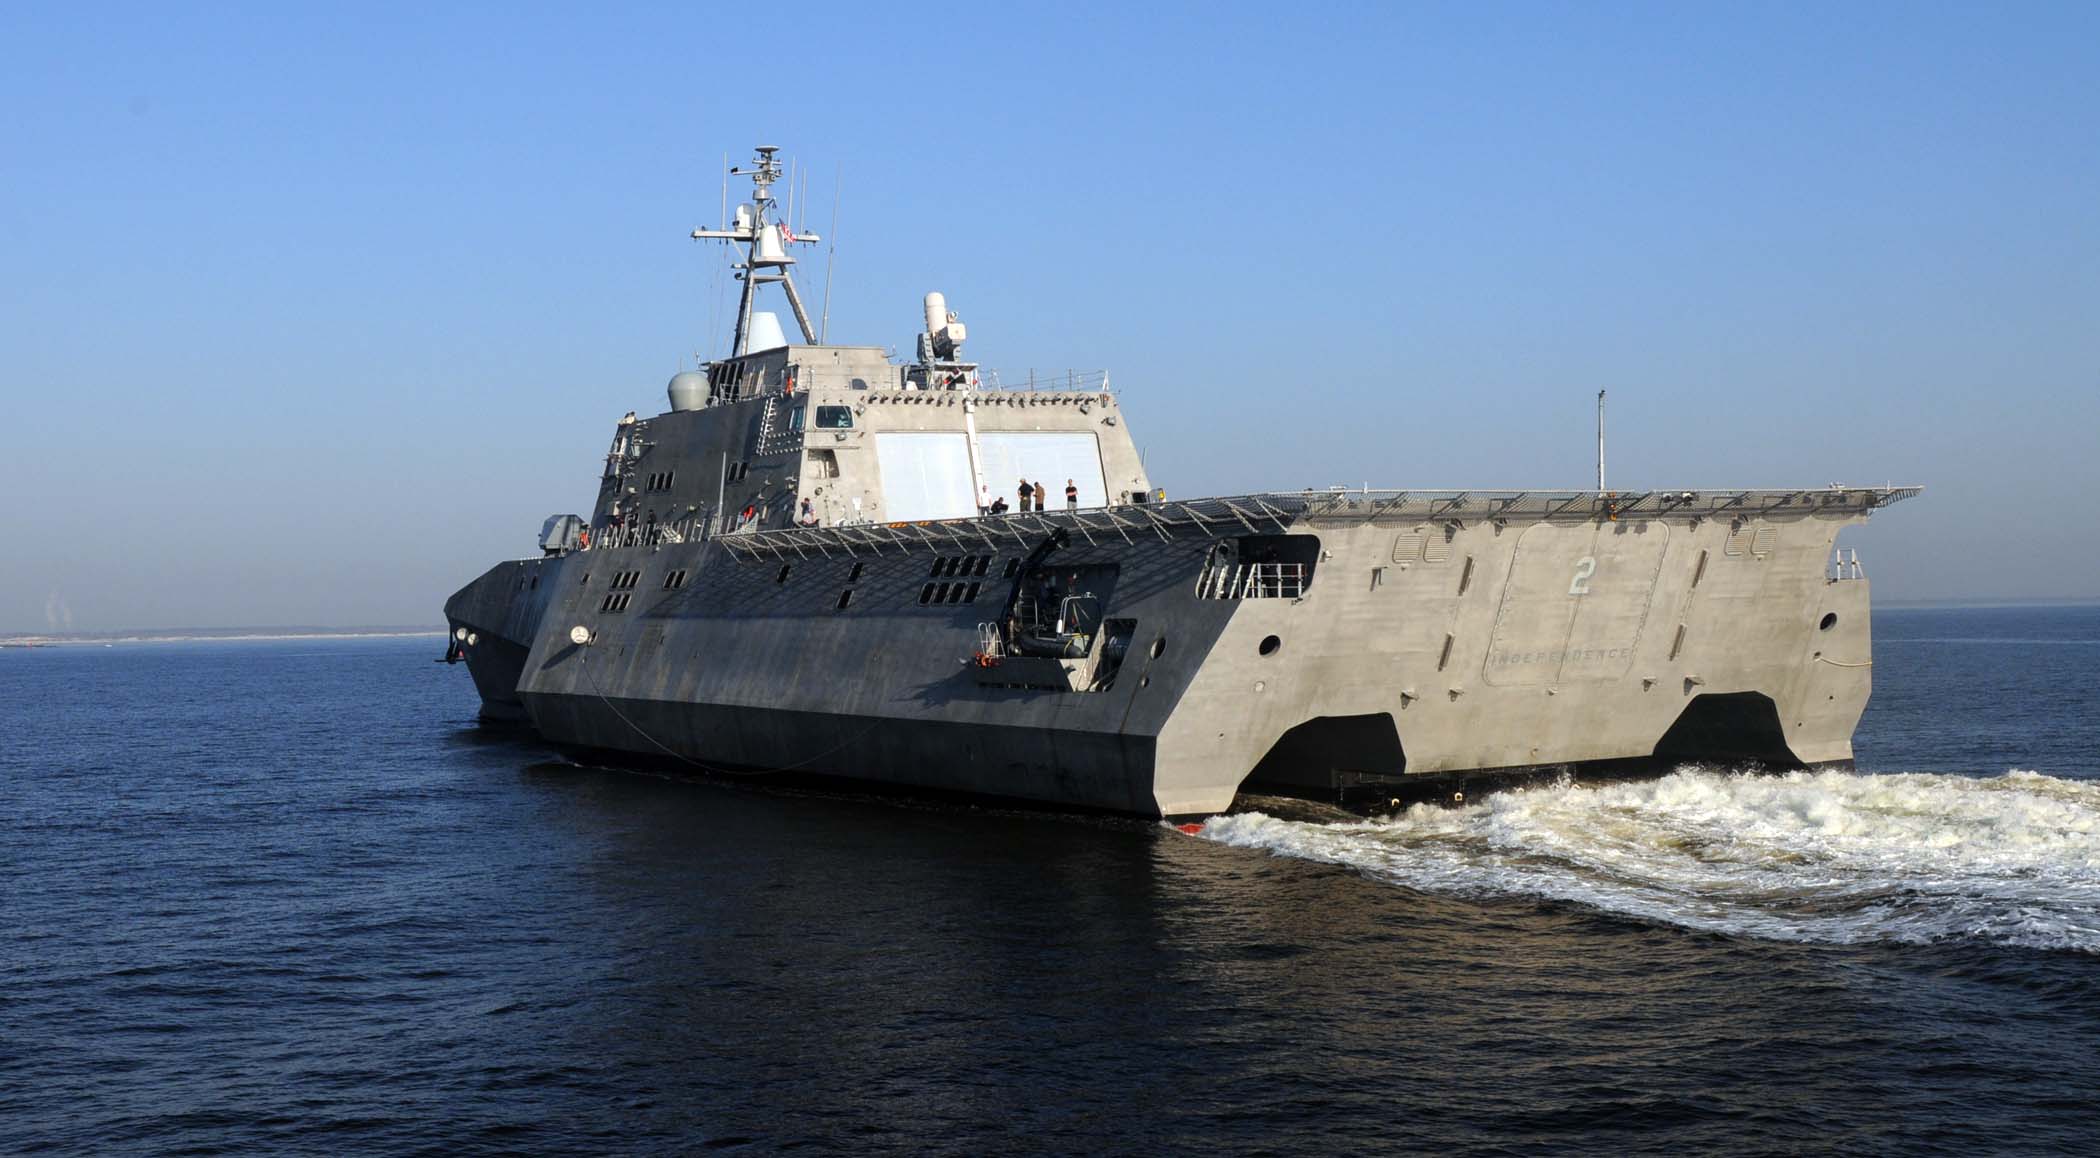 US_Navy_100402-N-7653W-102_The_Littoral_combat_ship_USS_Independence_%28LCS_2%29_approaches_Mayport,_Fla.jpg